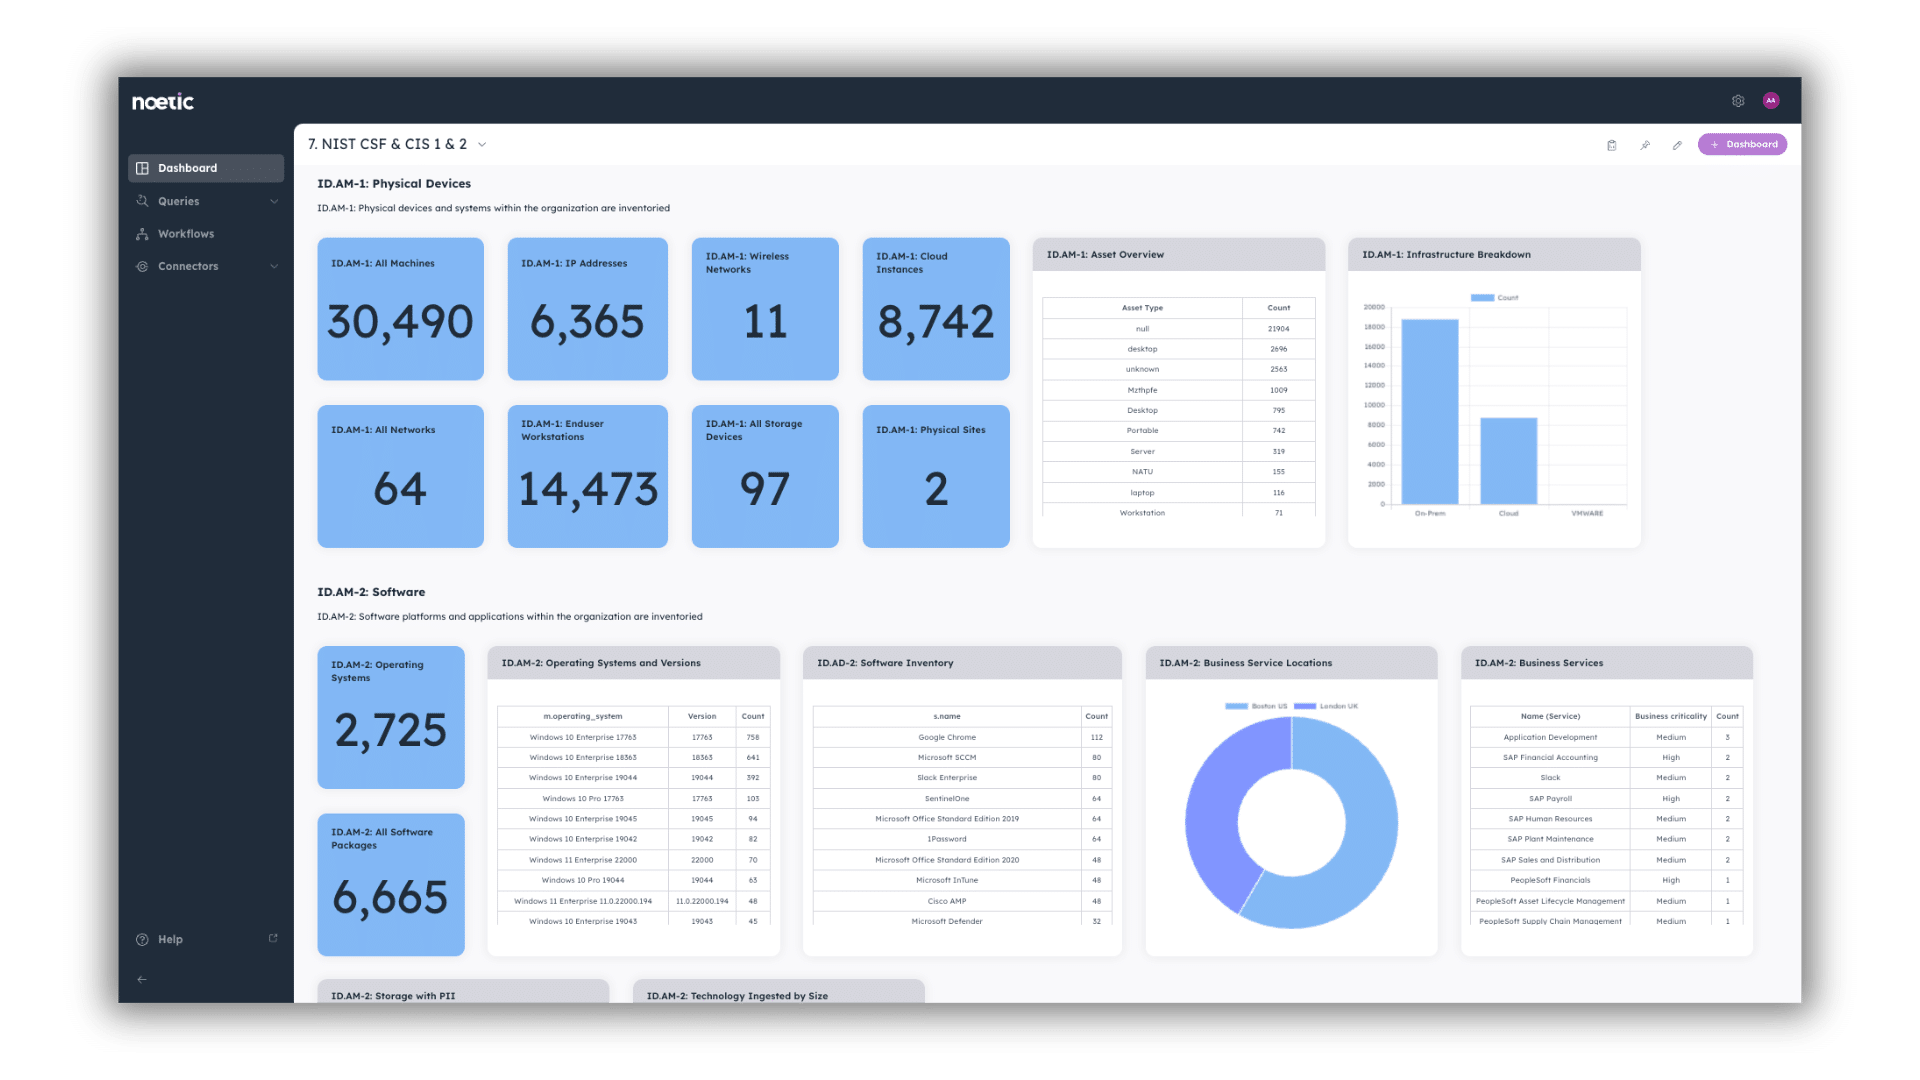 Noetic platform dashboard provides a comprehensive overview of evidence against NIST Cybersecurity Framework controls